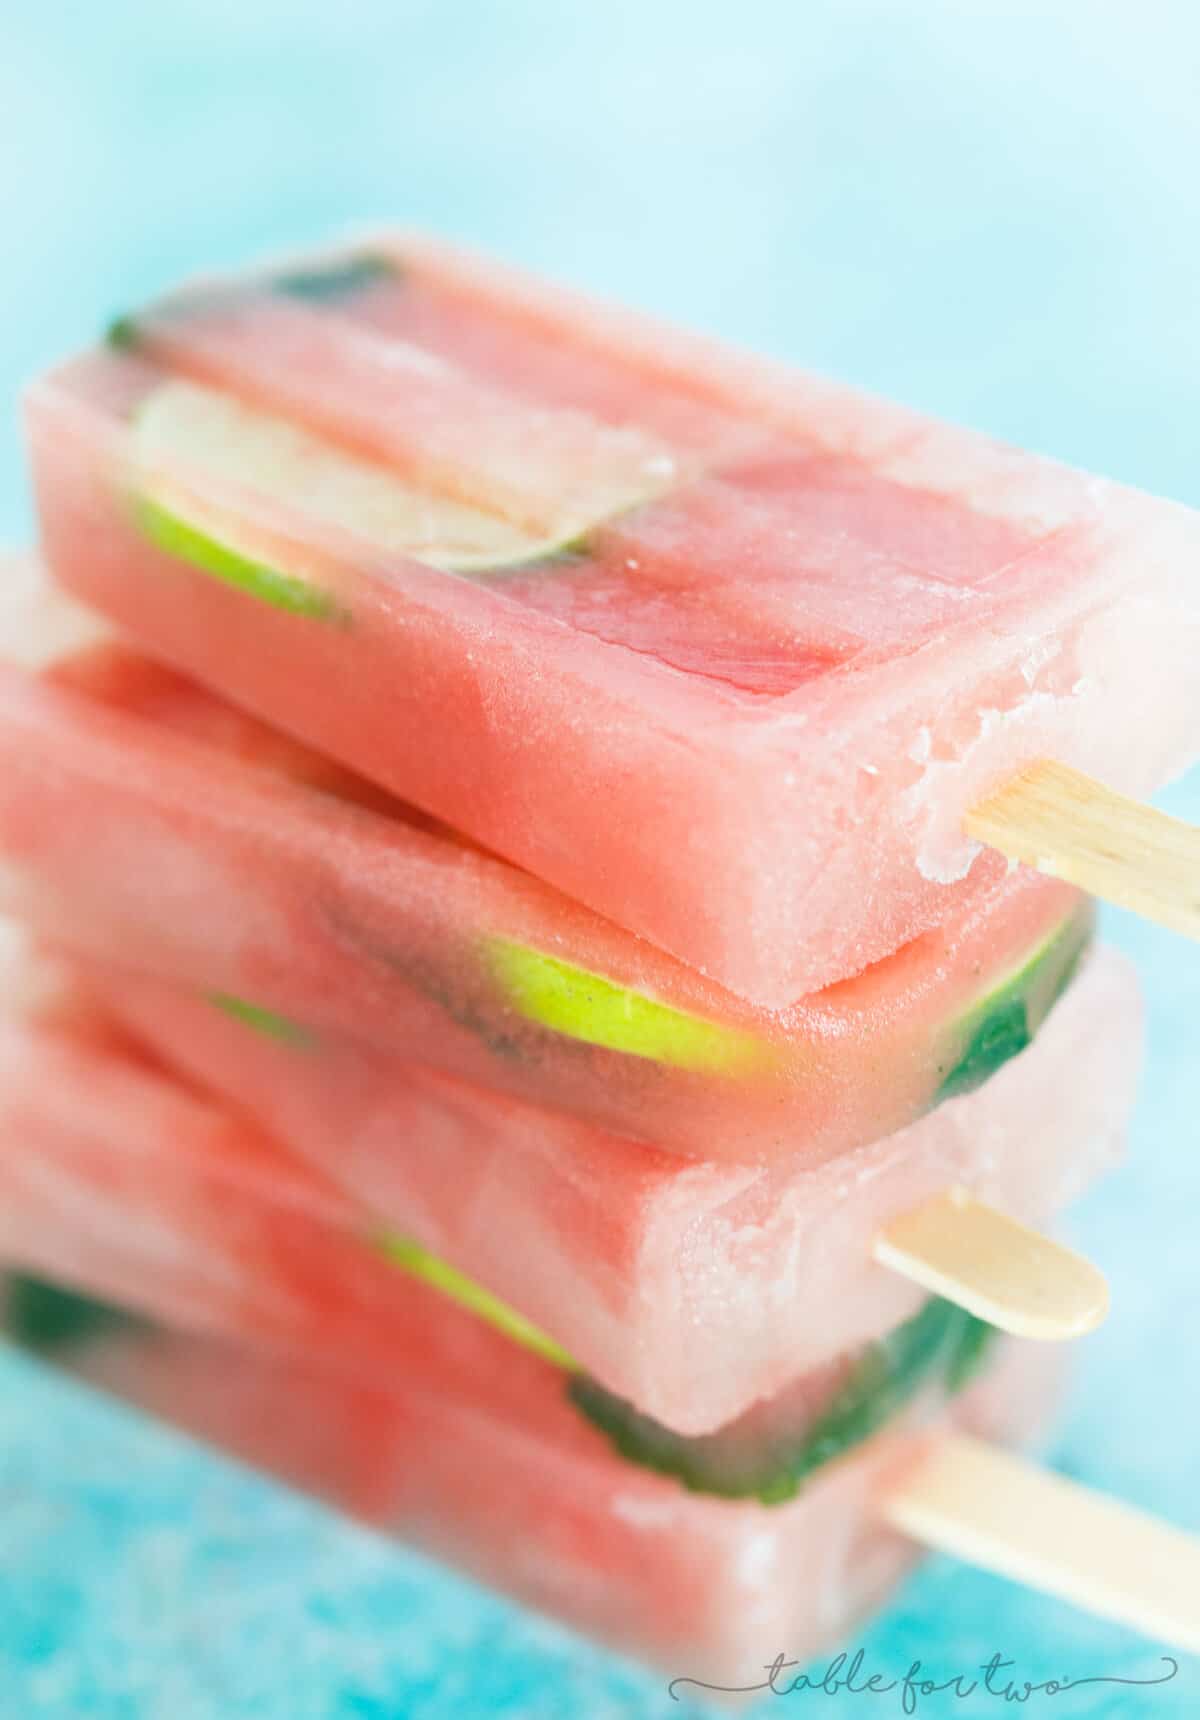 A cool and refreshing summer frozen treat. These watermelon mint lemonade popsicles are the perfect way to cool down! Grab them before they melt!